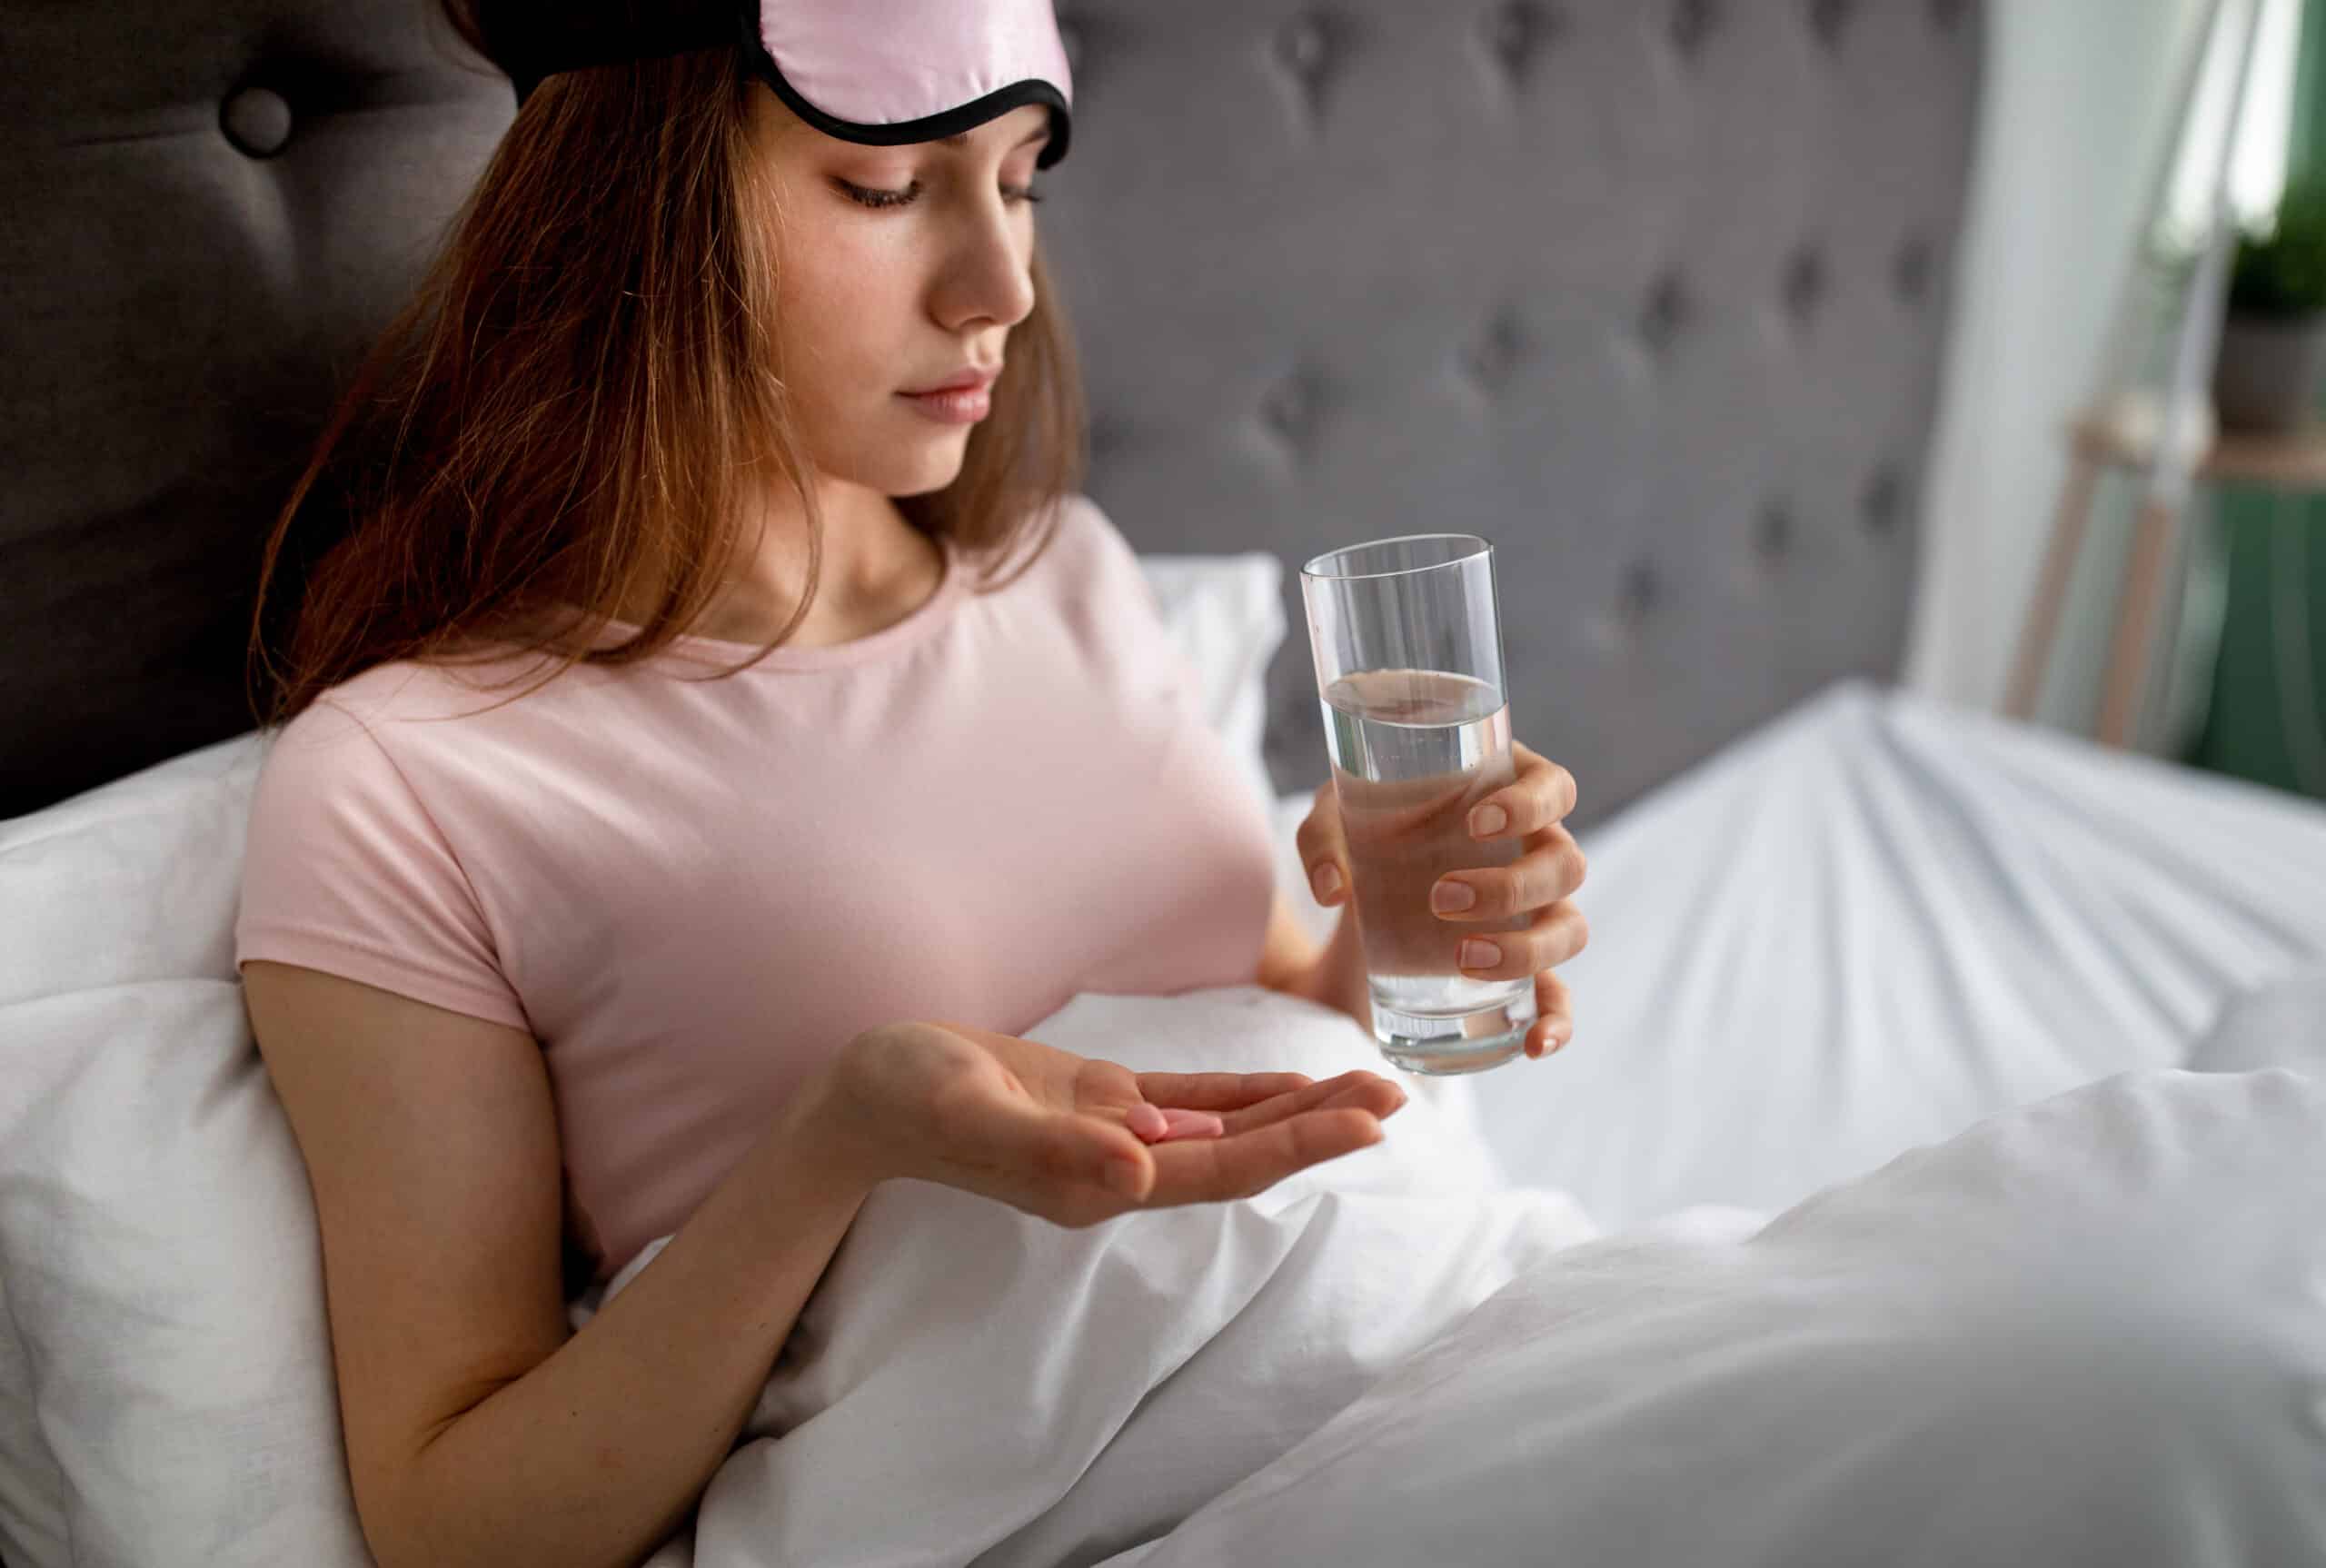 upset young woman sitting in bed with glass of wat 2022 12 16 07 31 48 utc scaled